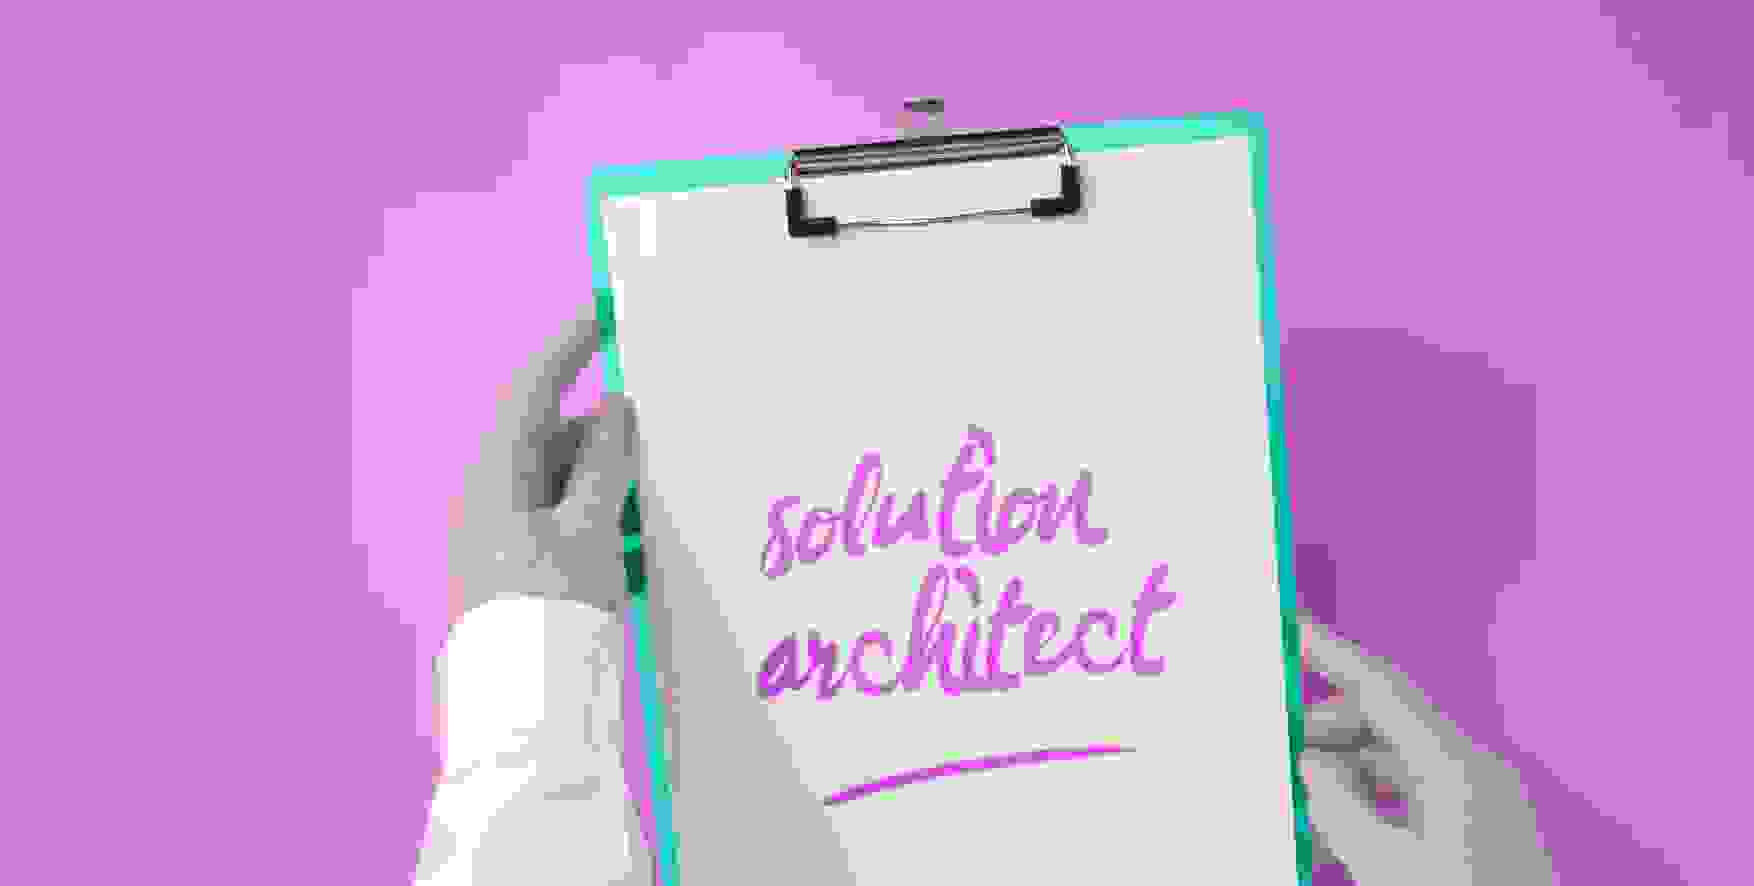 solution architect written on a piece of paper in a clipboard